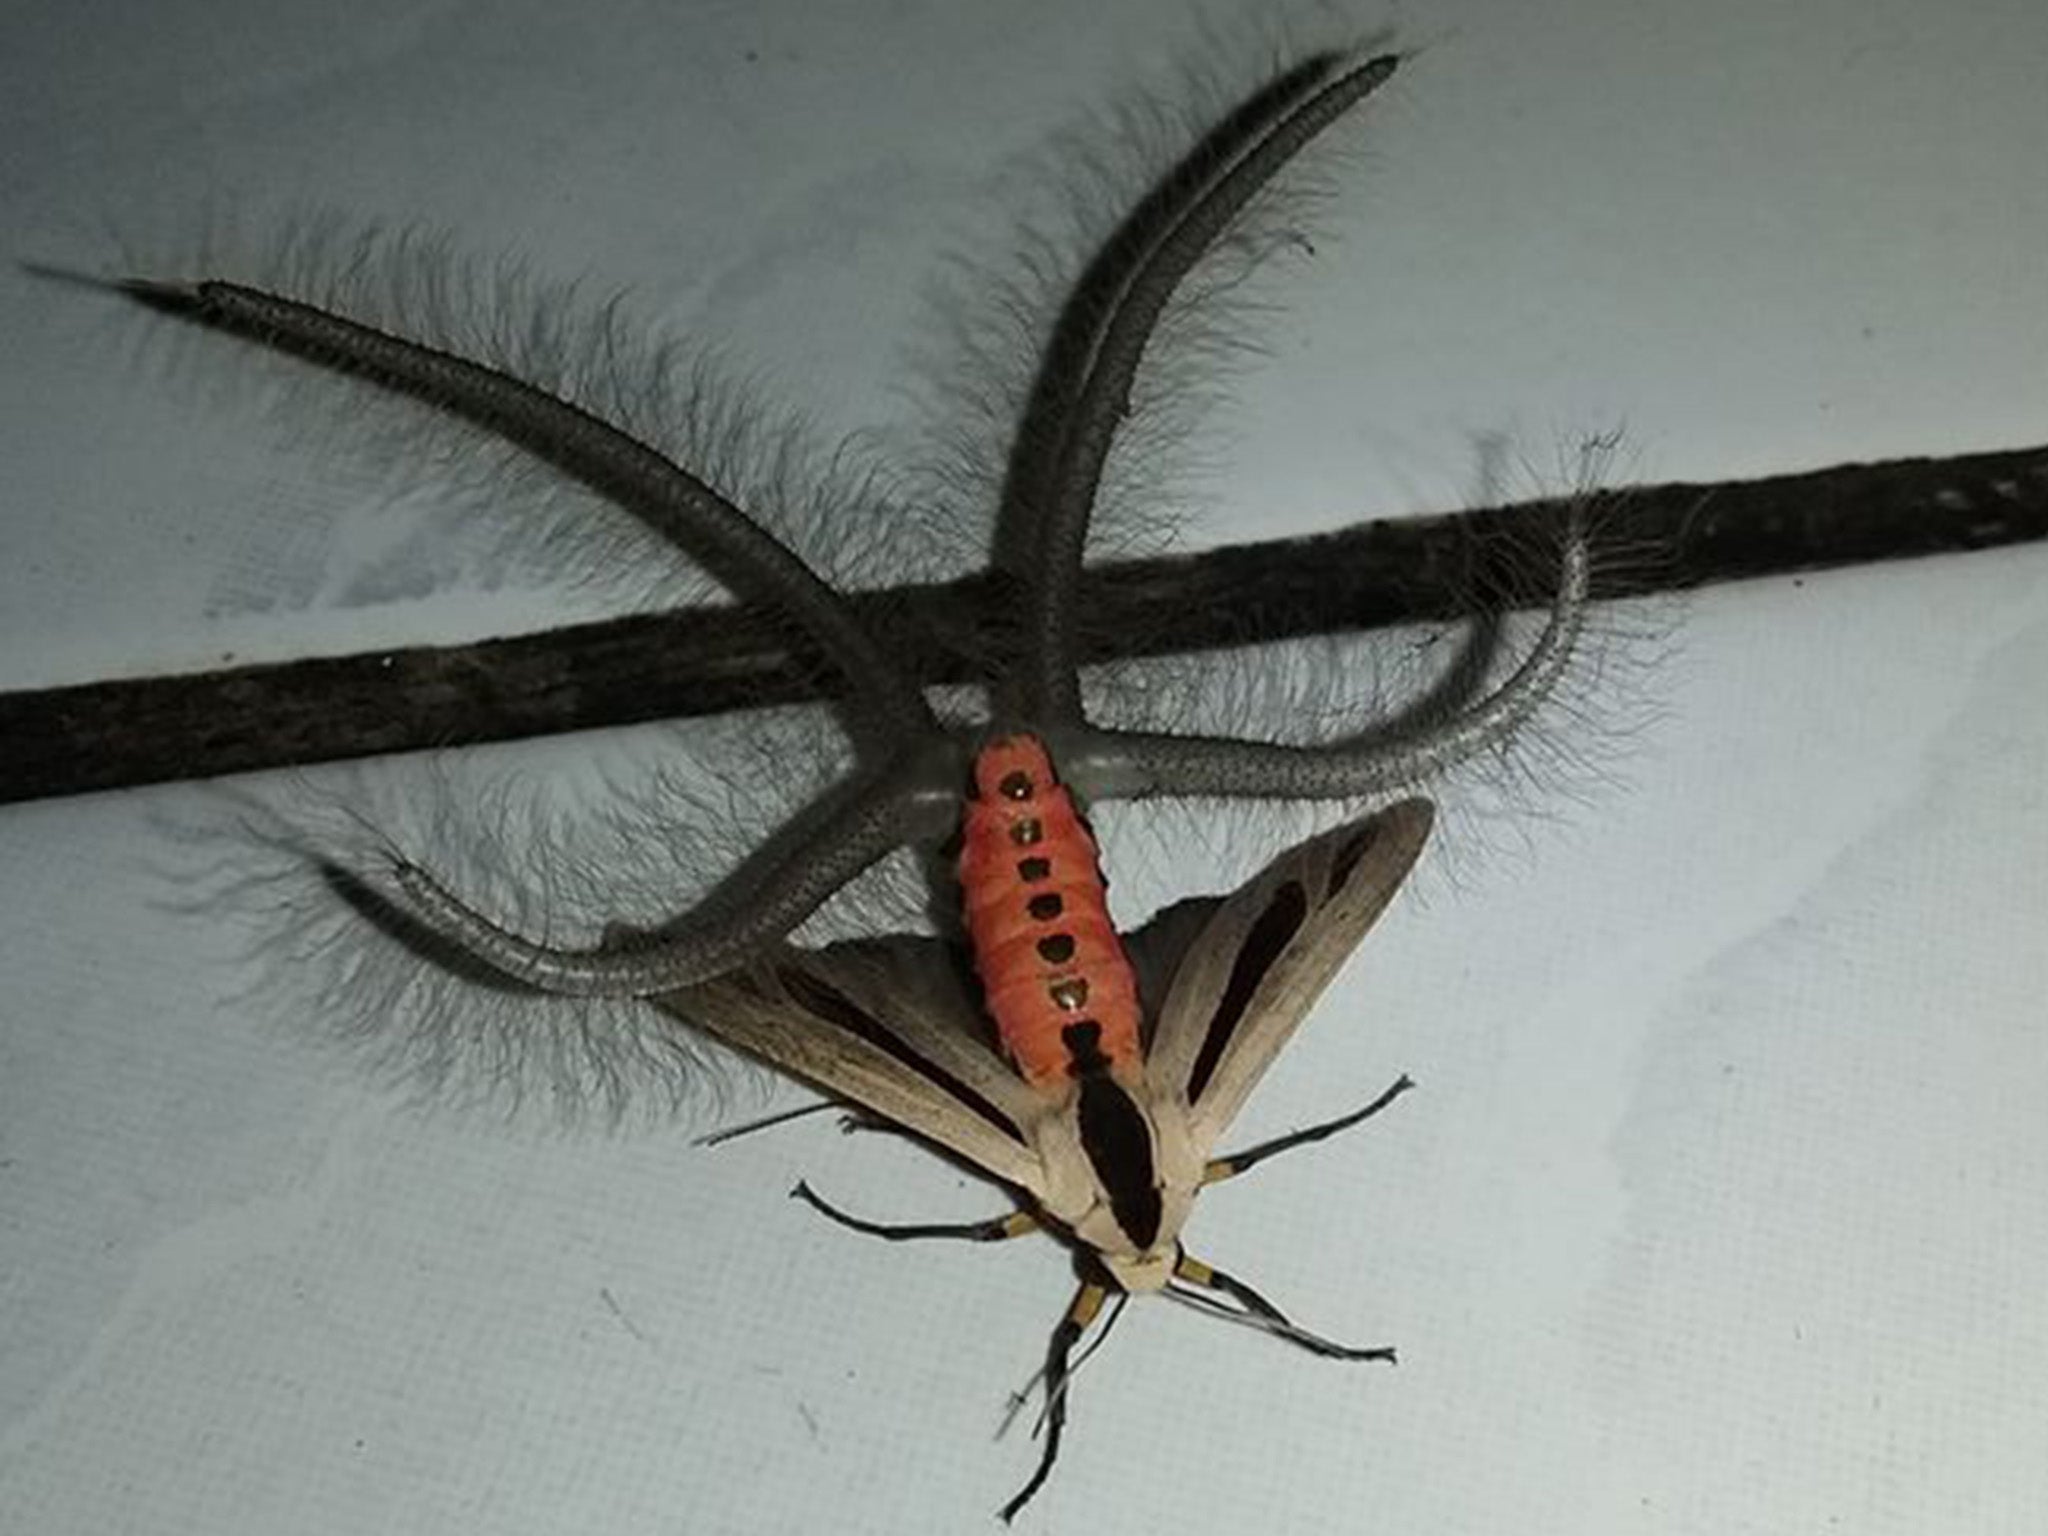 Experts identified the creature as a specie of moth, specifically a Creatonotos Gangis